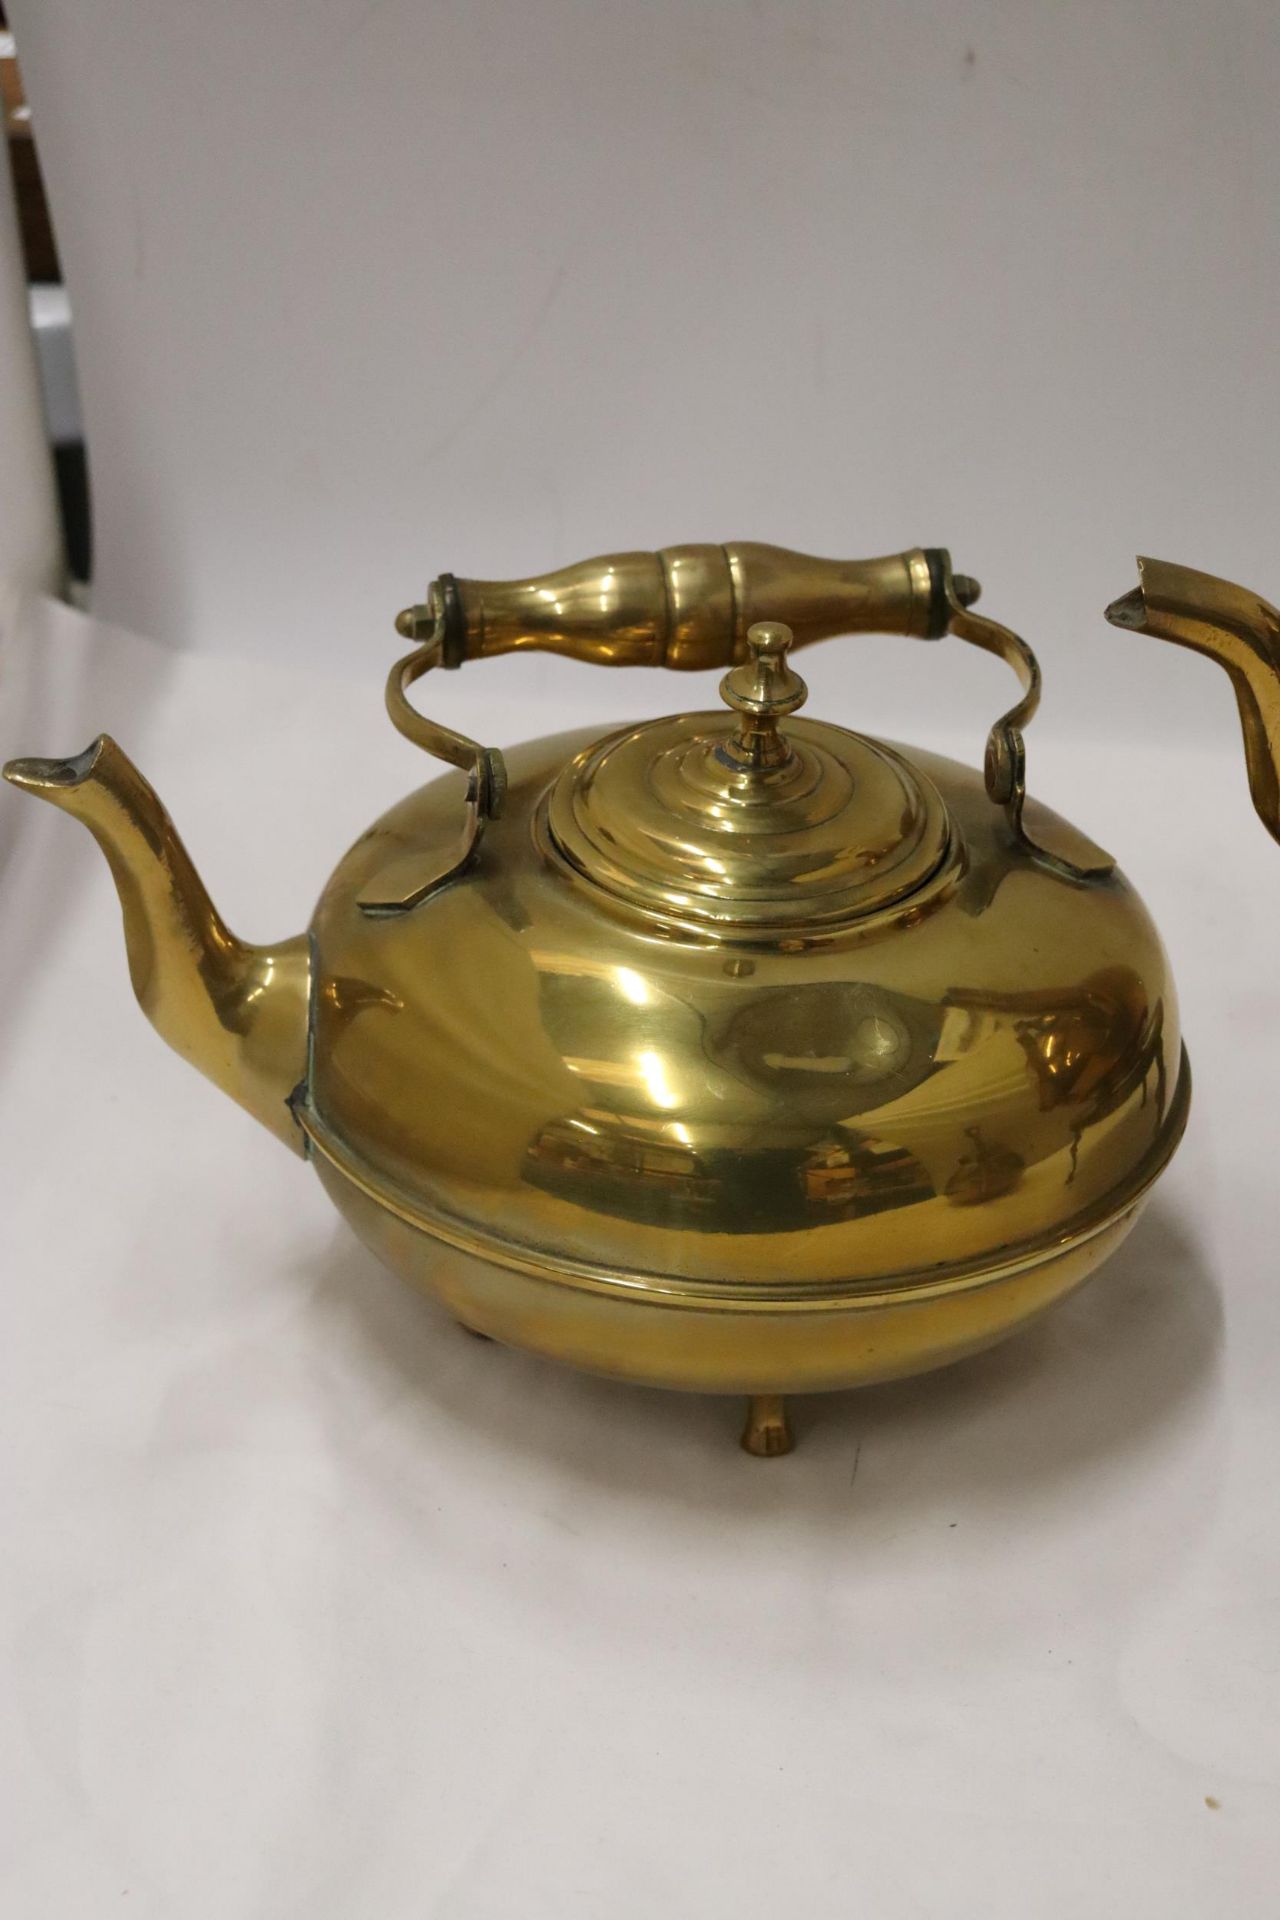 TWO BRASS KETTLES, A CLOISONNE KETTLE AND A TRIVET - Image 3 of 8